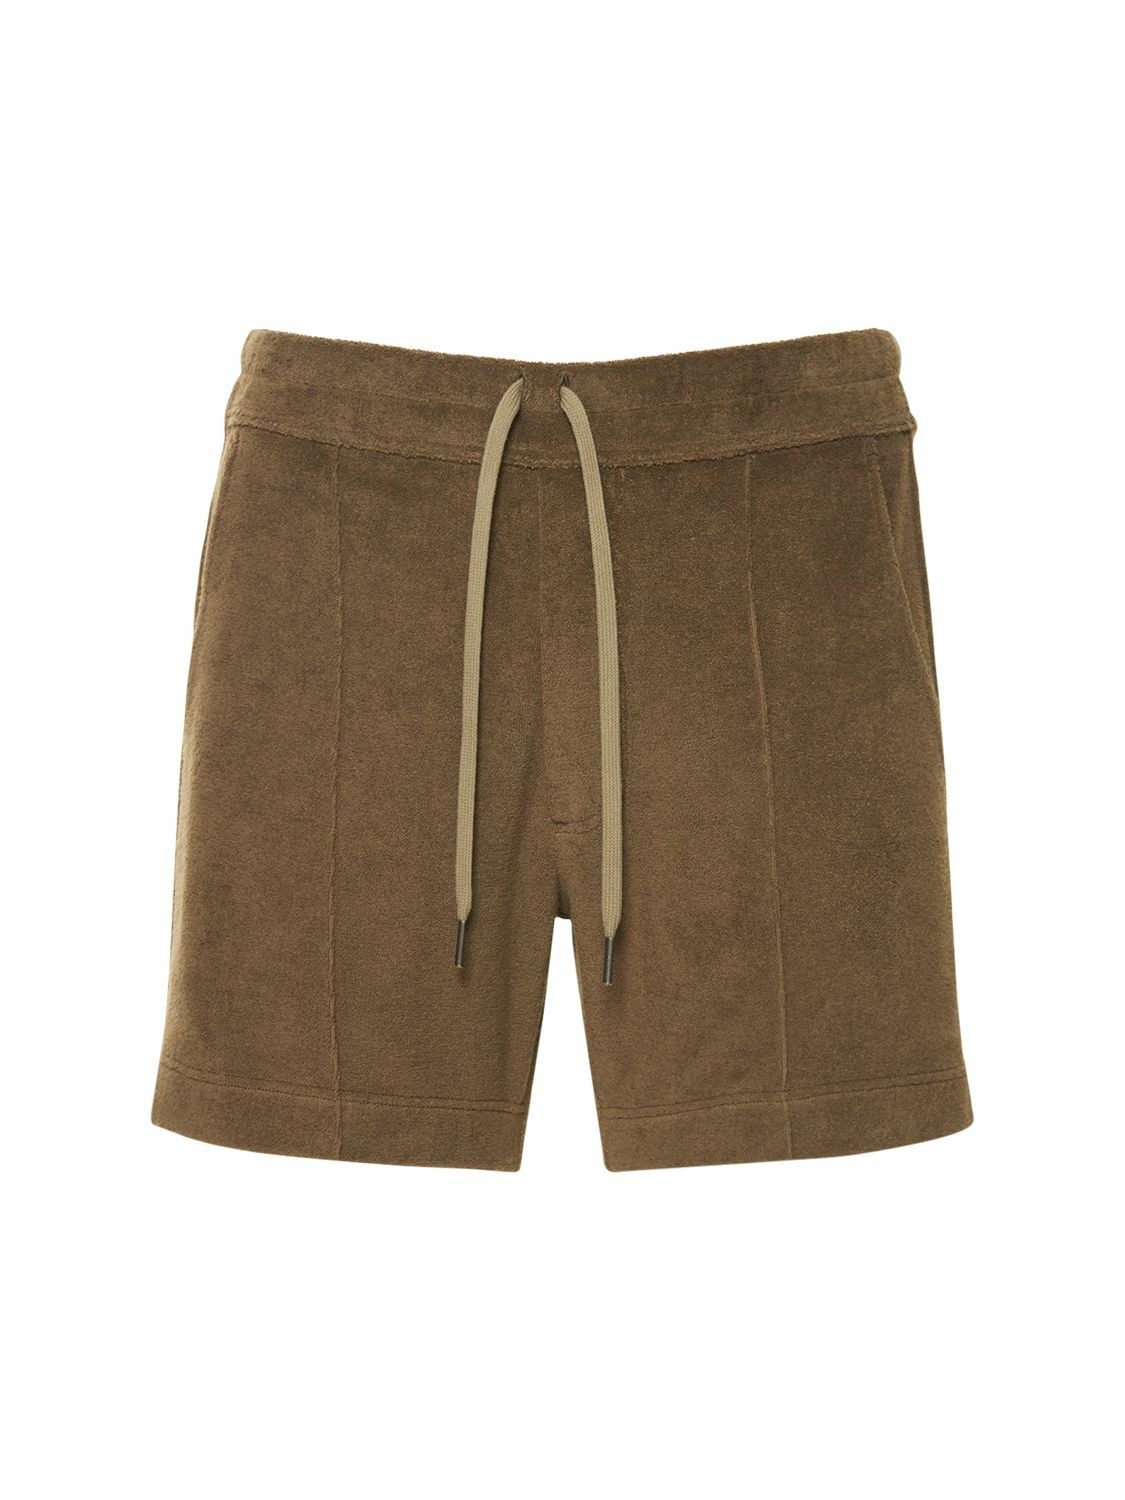 Photo: TOM FORD - Towelling Shorts